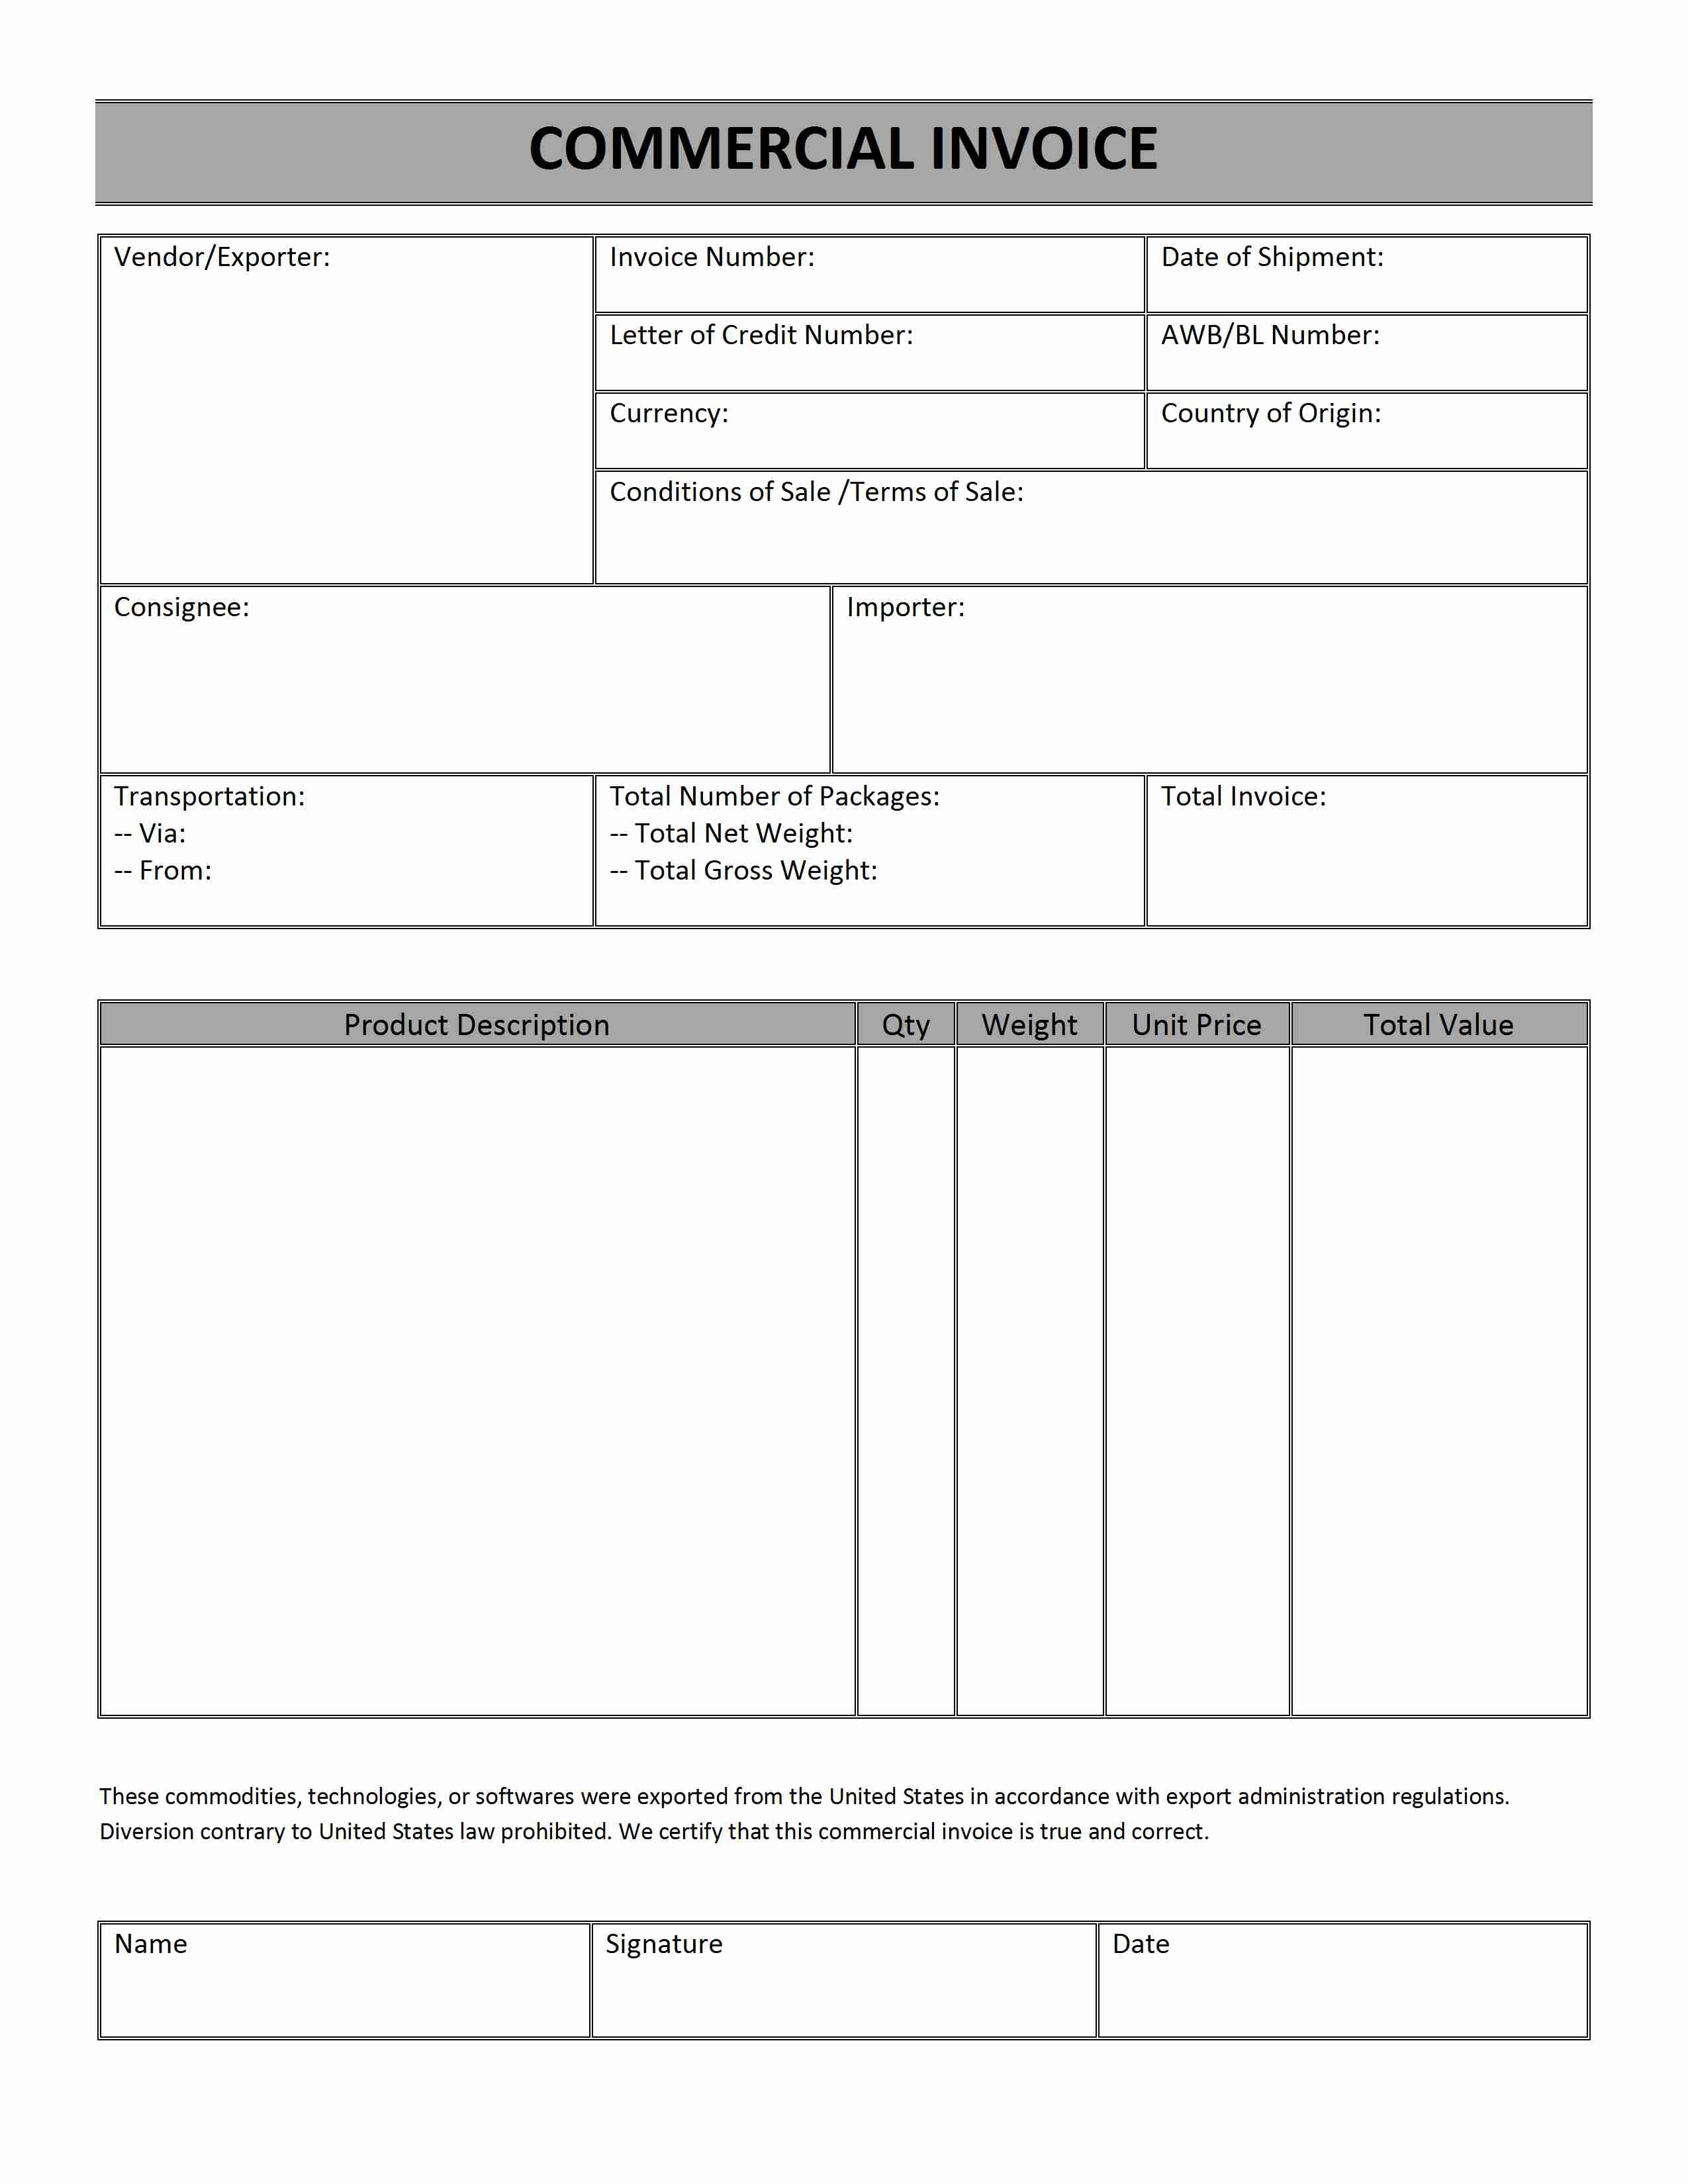 commercial invoice word templates free word templates ms shipment requires a commercial invoice